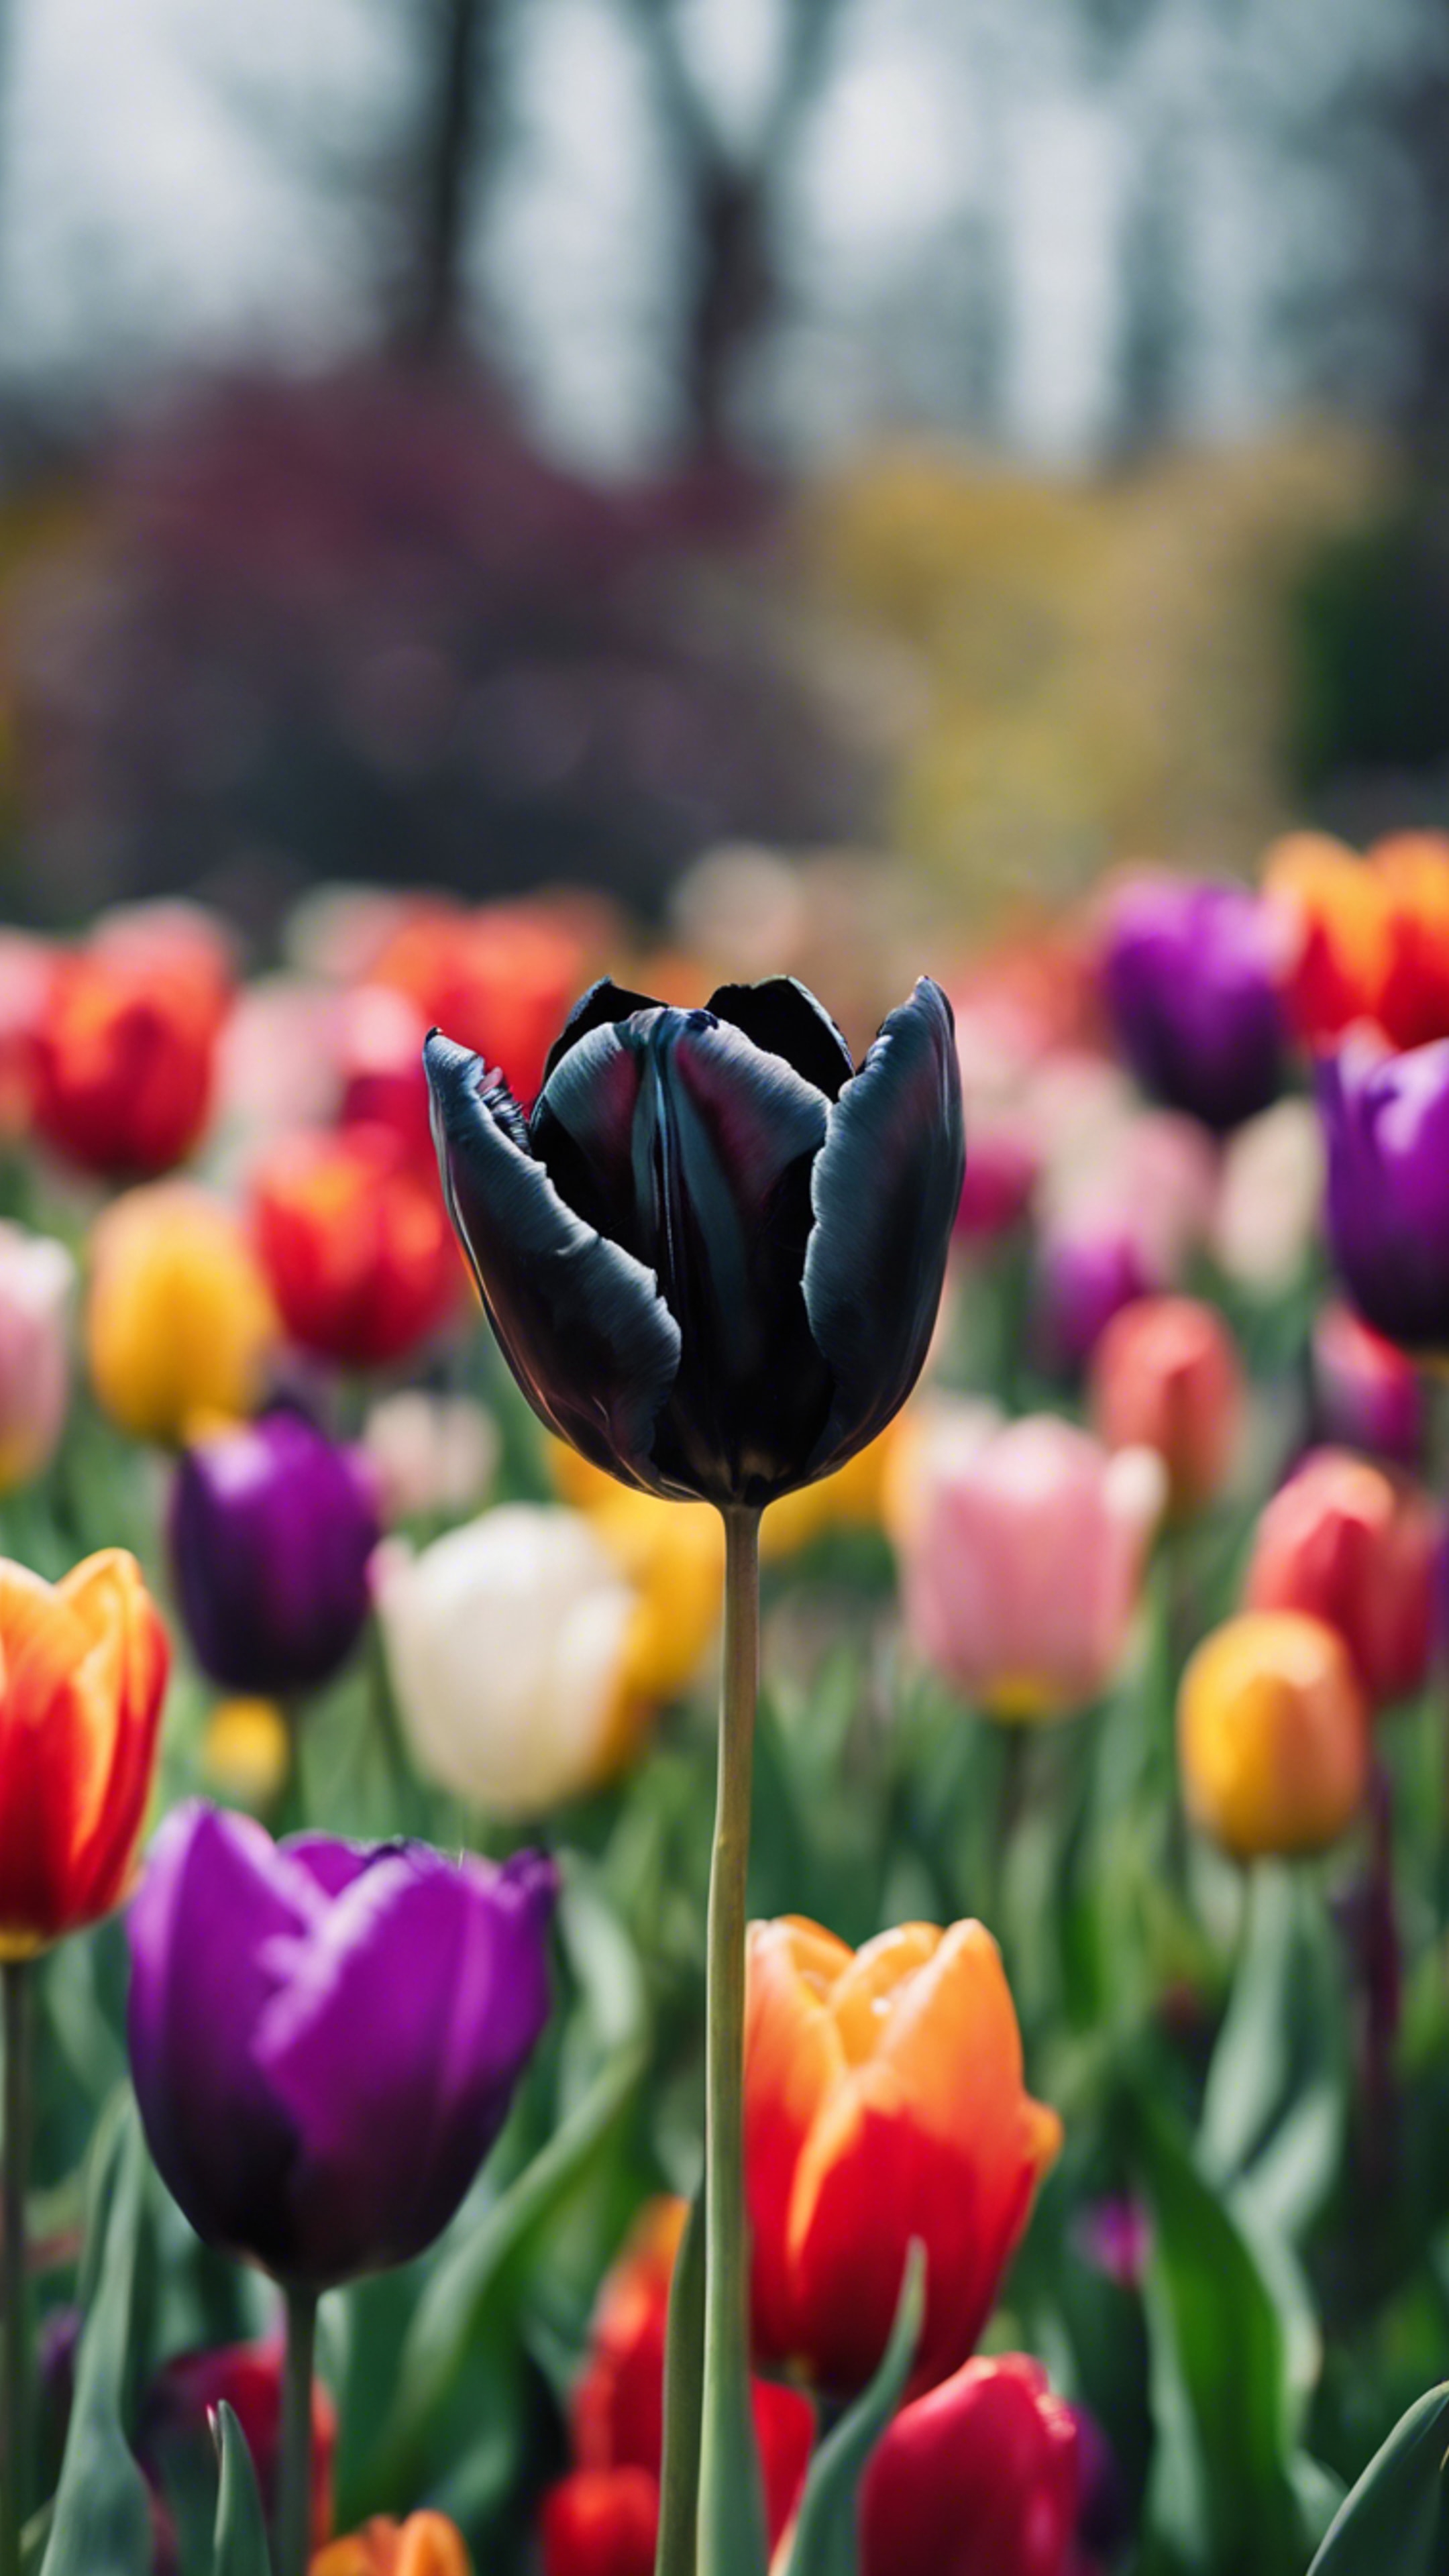 A delicate black tulip, standing out dramatically among a vibrant spray of multicolored tulips in a spring garden. کاغذ دیواری[60dfa6a8a46243228945]